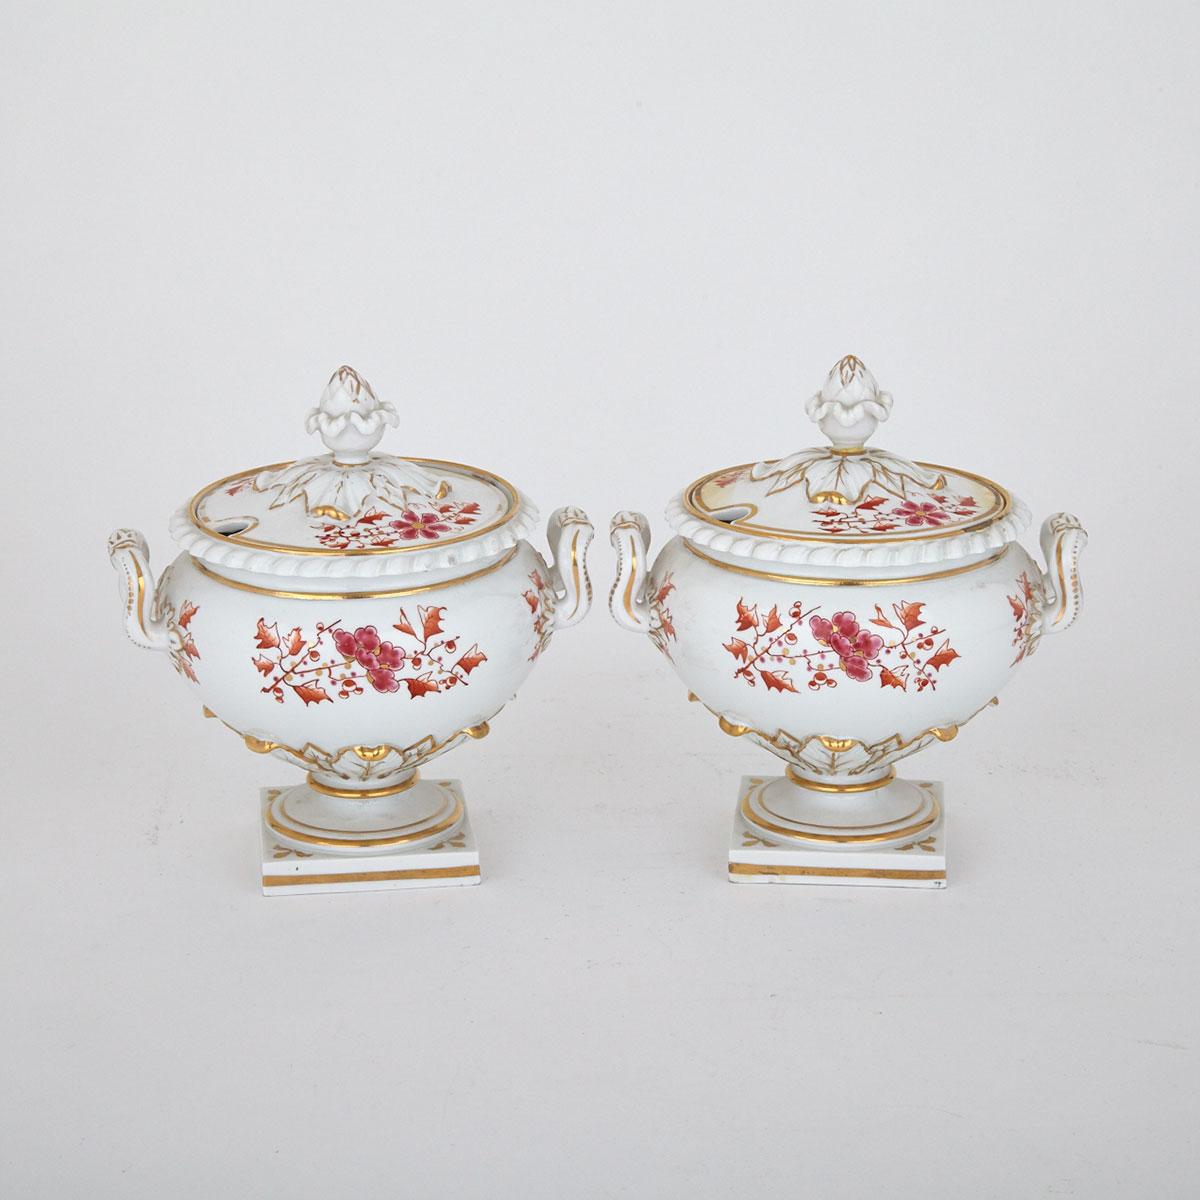 Pair of Flight, Barr & Barr Worcester Covered Sauce Tureens, c.1825